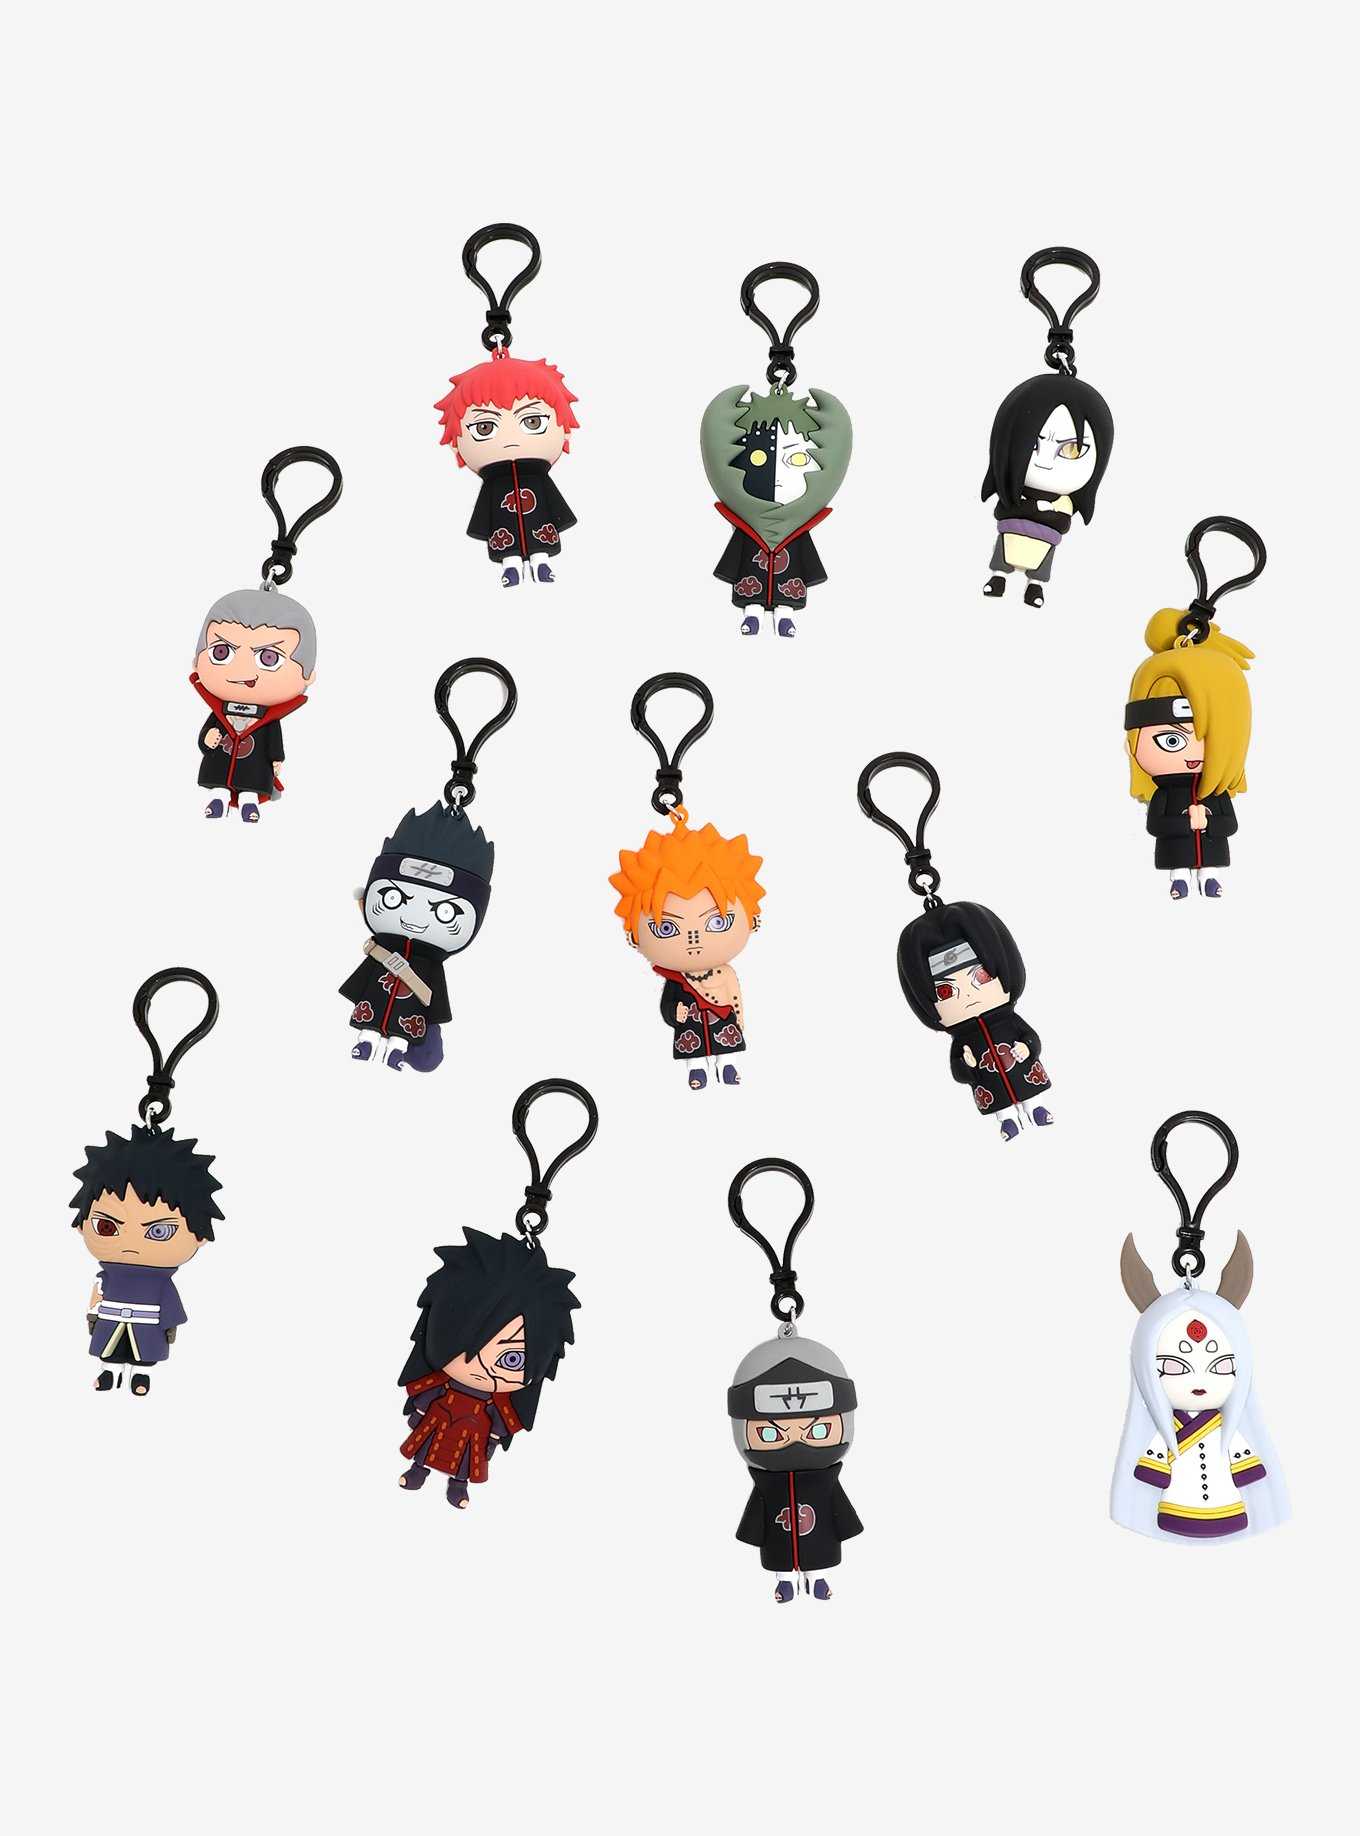 Naruto Characters 5 Piece Backpack Set